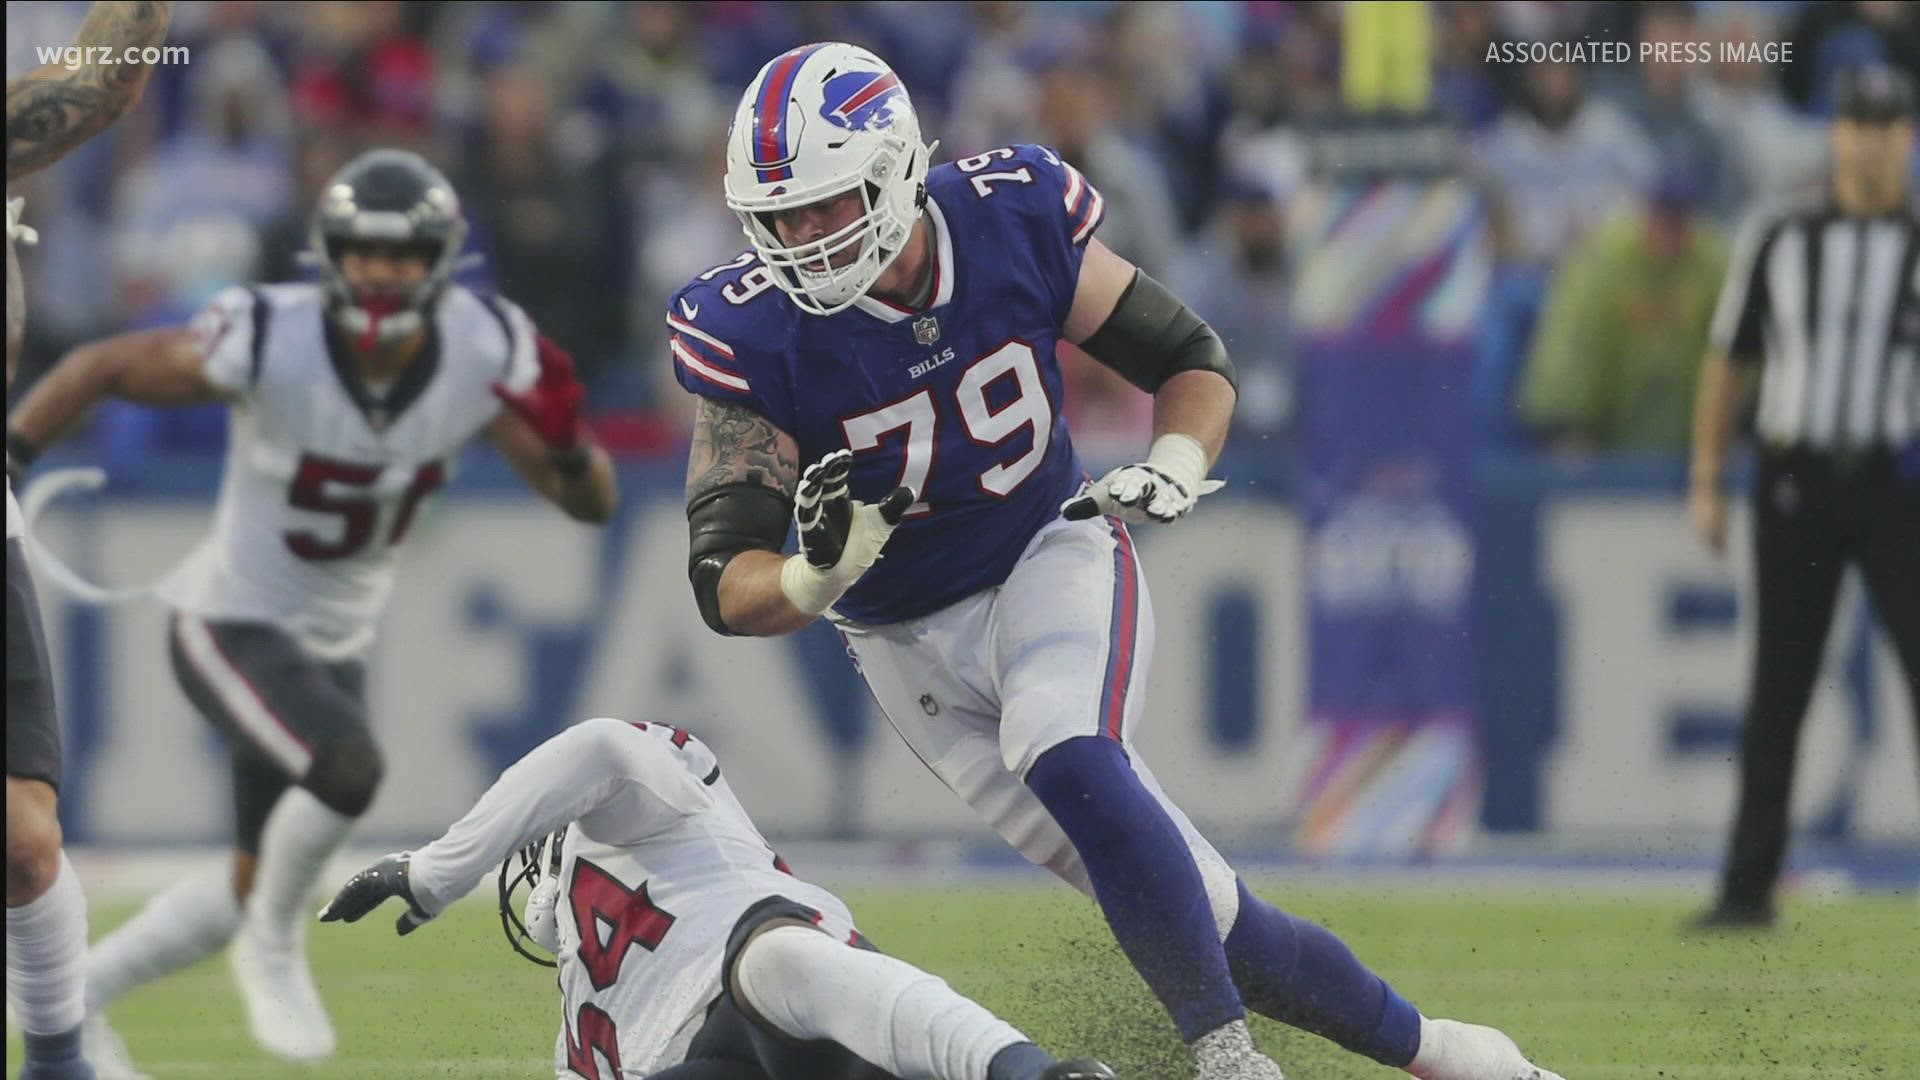 With offensive lineman Spencer Brown added to the Bills' COVID list, 2 On Your Side asked Vic Carucci  what this means for this Sunday's game against the Colts.